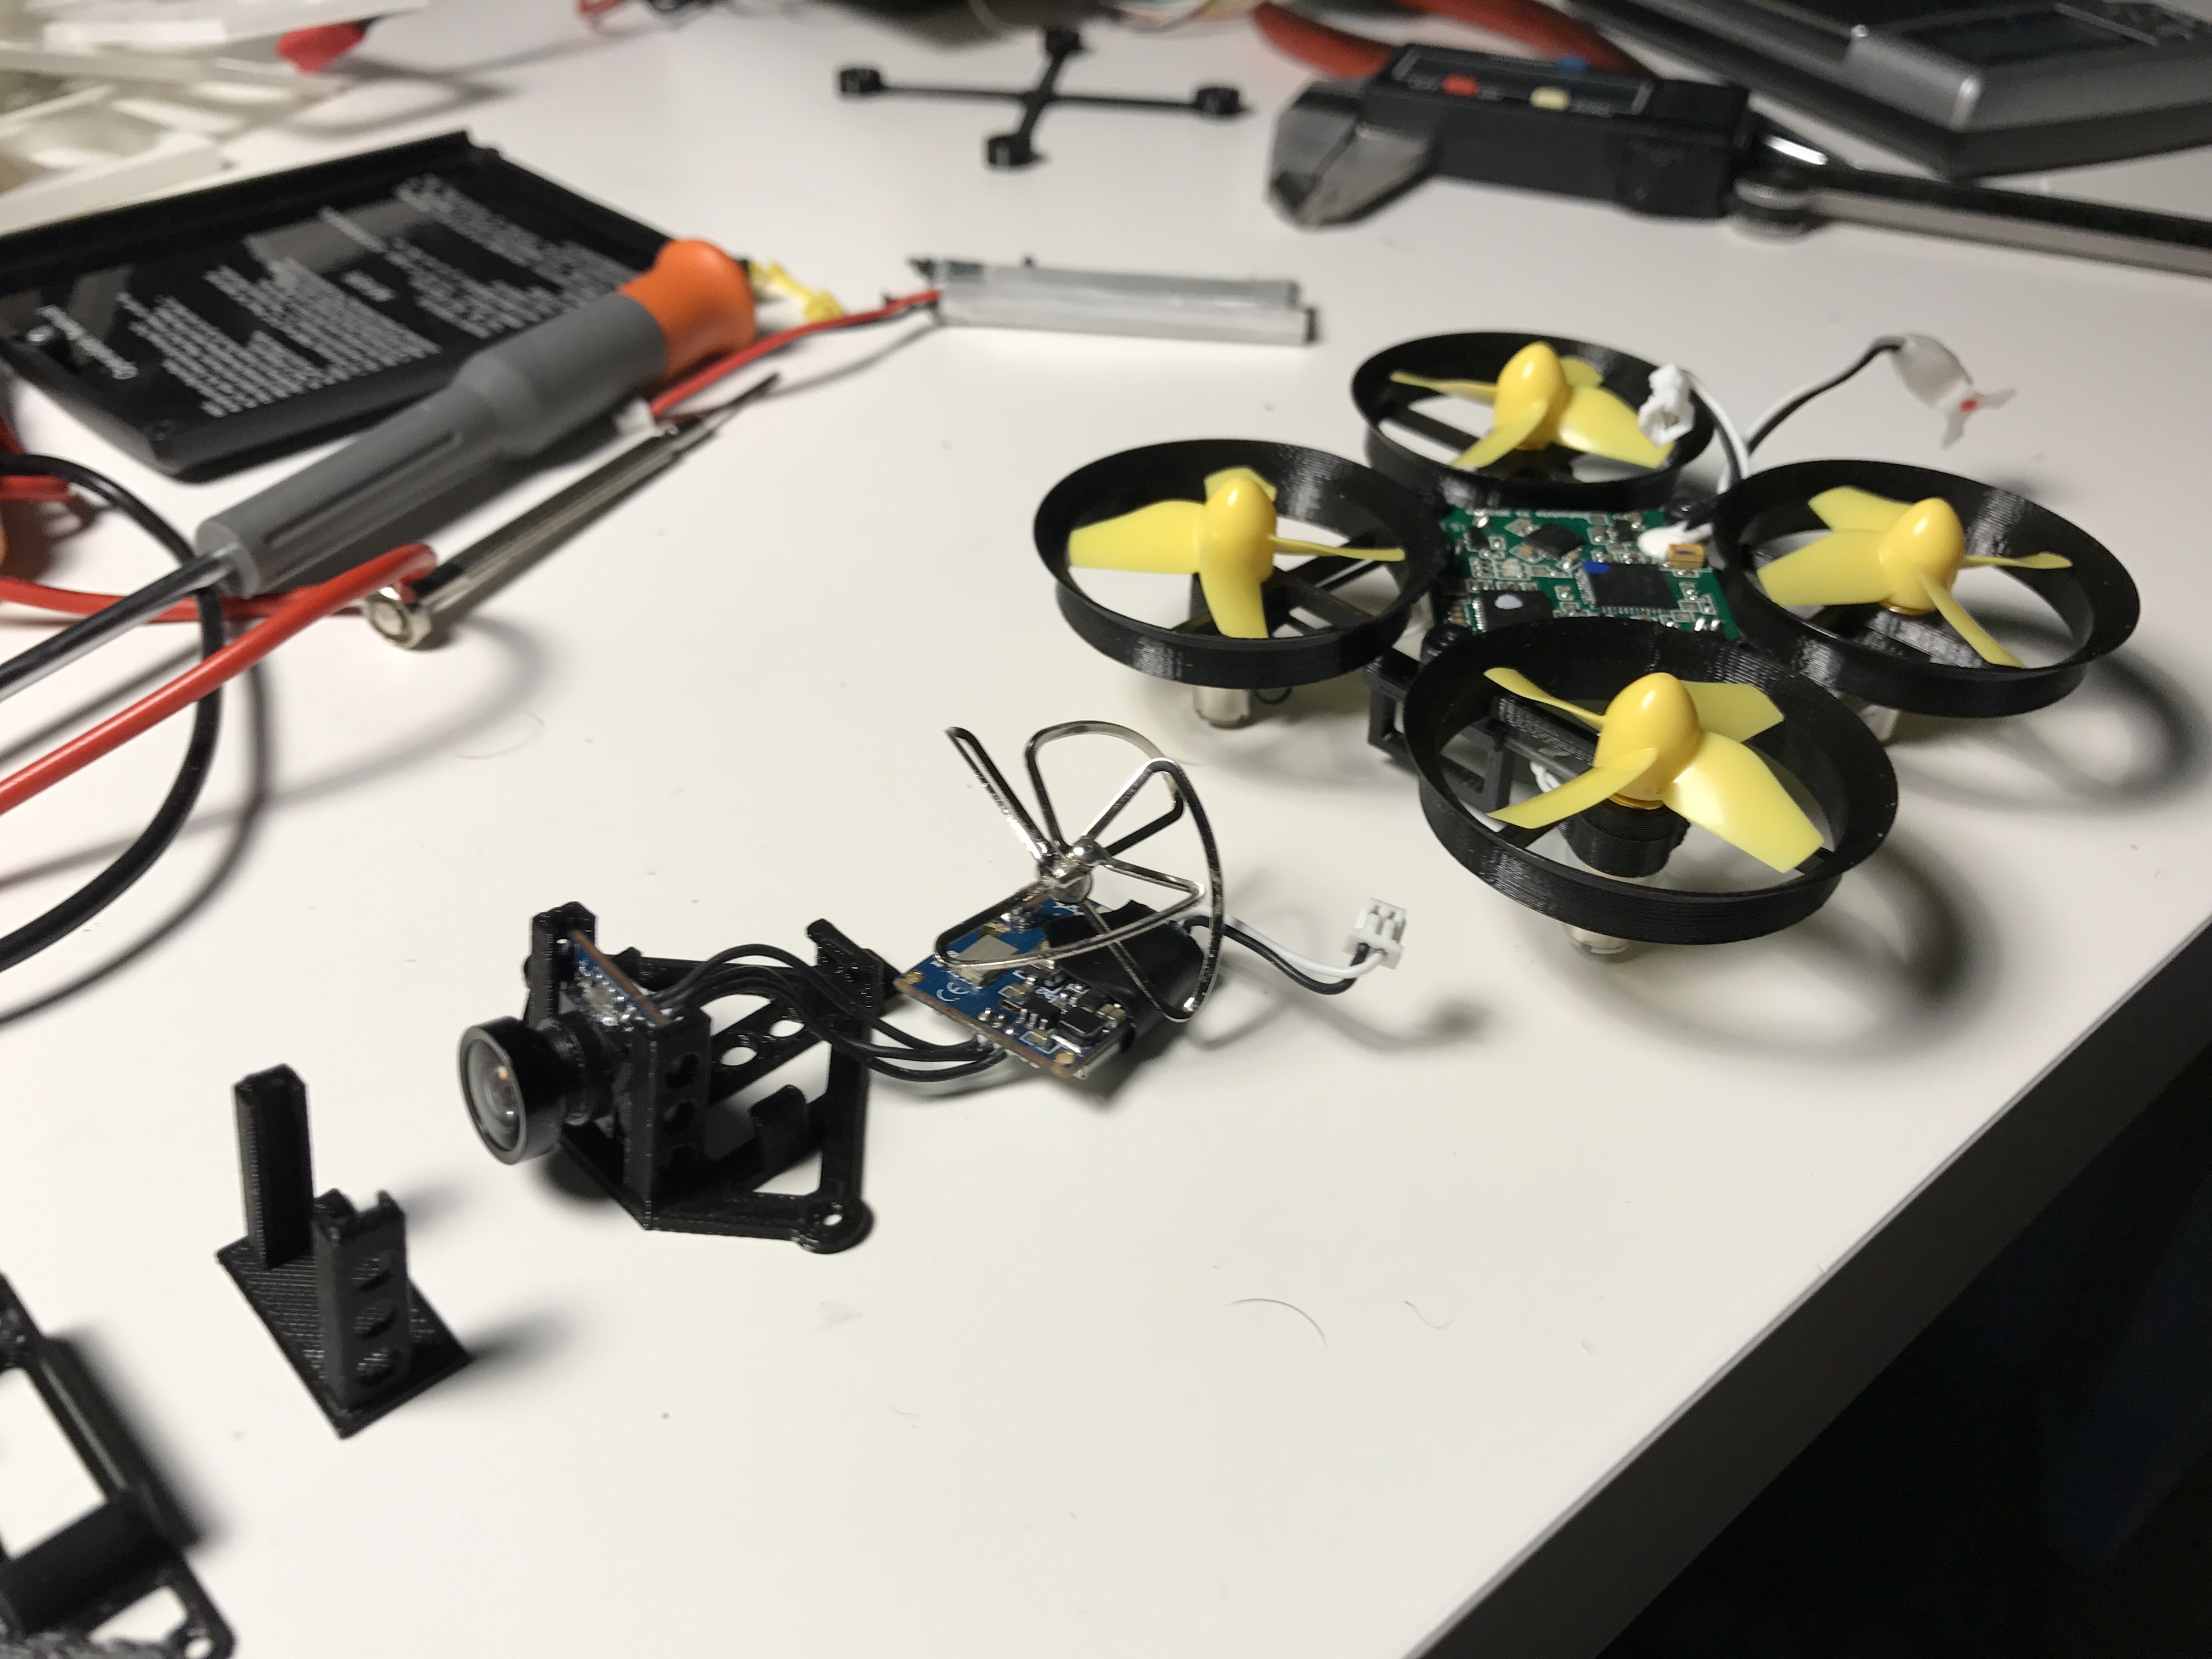 Tiny Whoop drone 3D printed